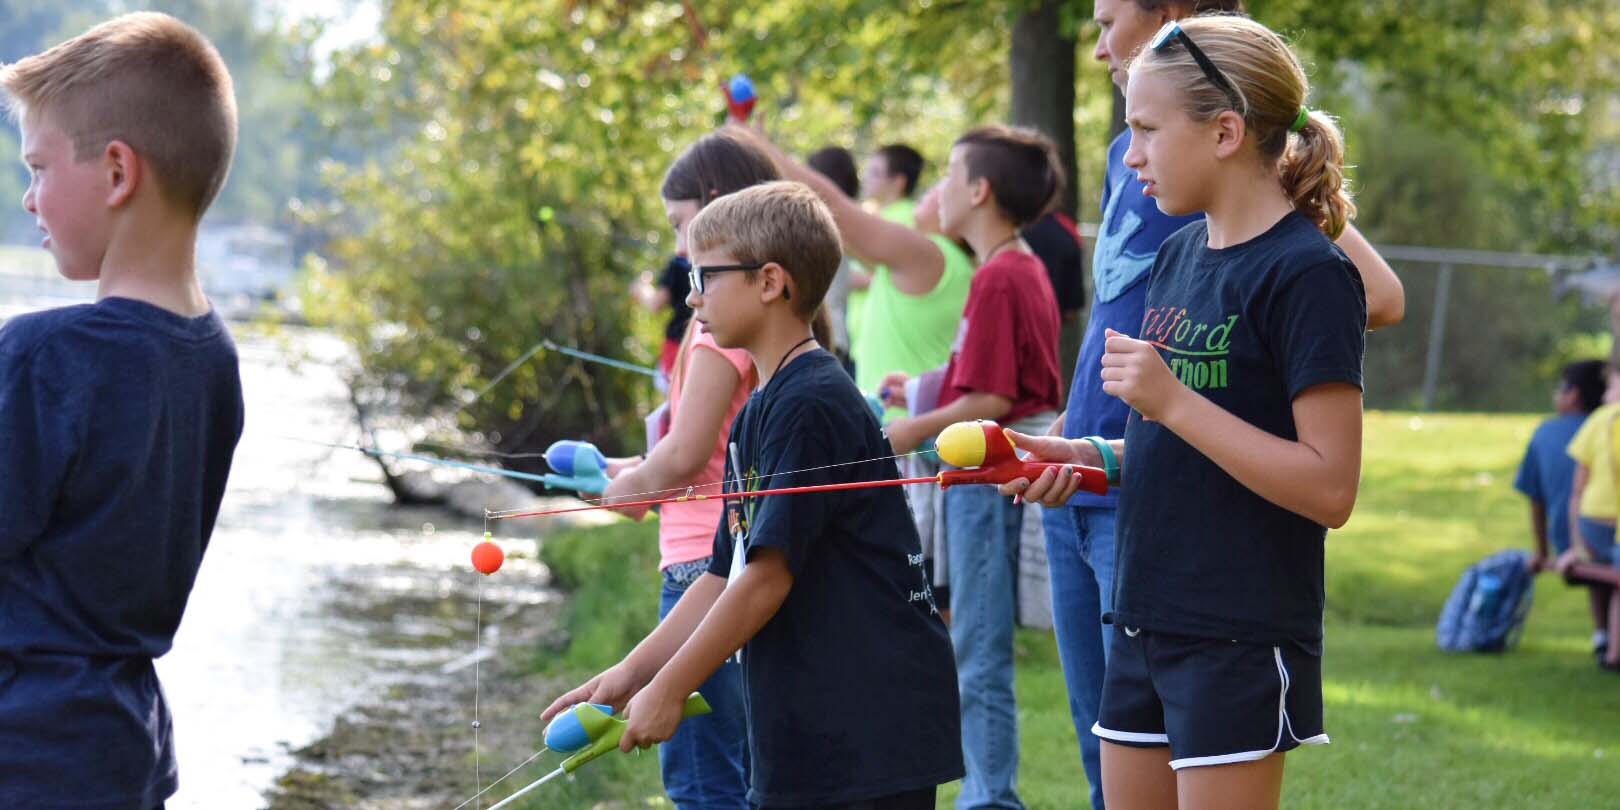 Fourth grade students from schools in Kosciusko County fish in Pike Lake as they learn about how to take care of local lakes and streams.